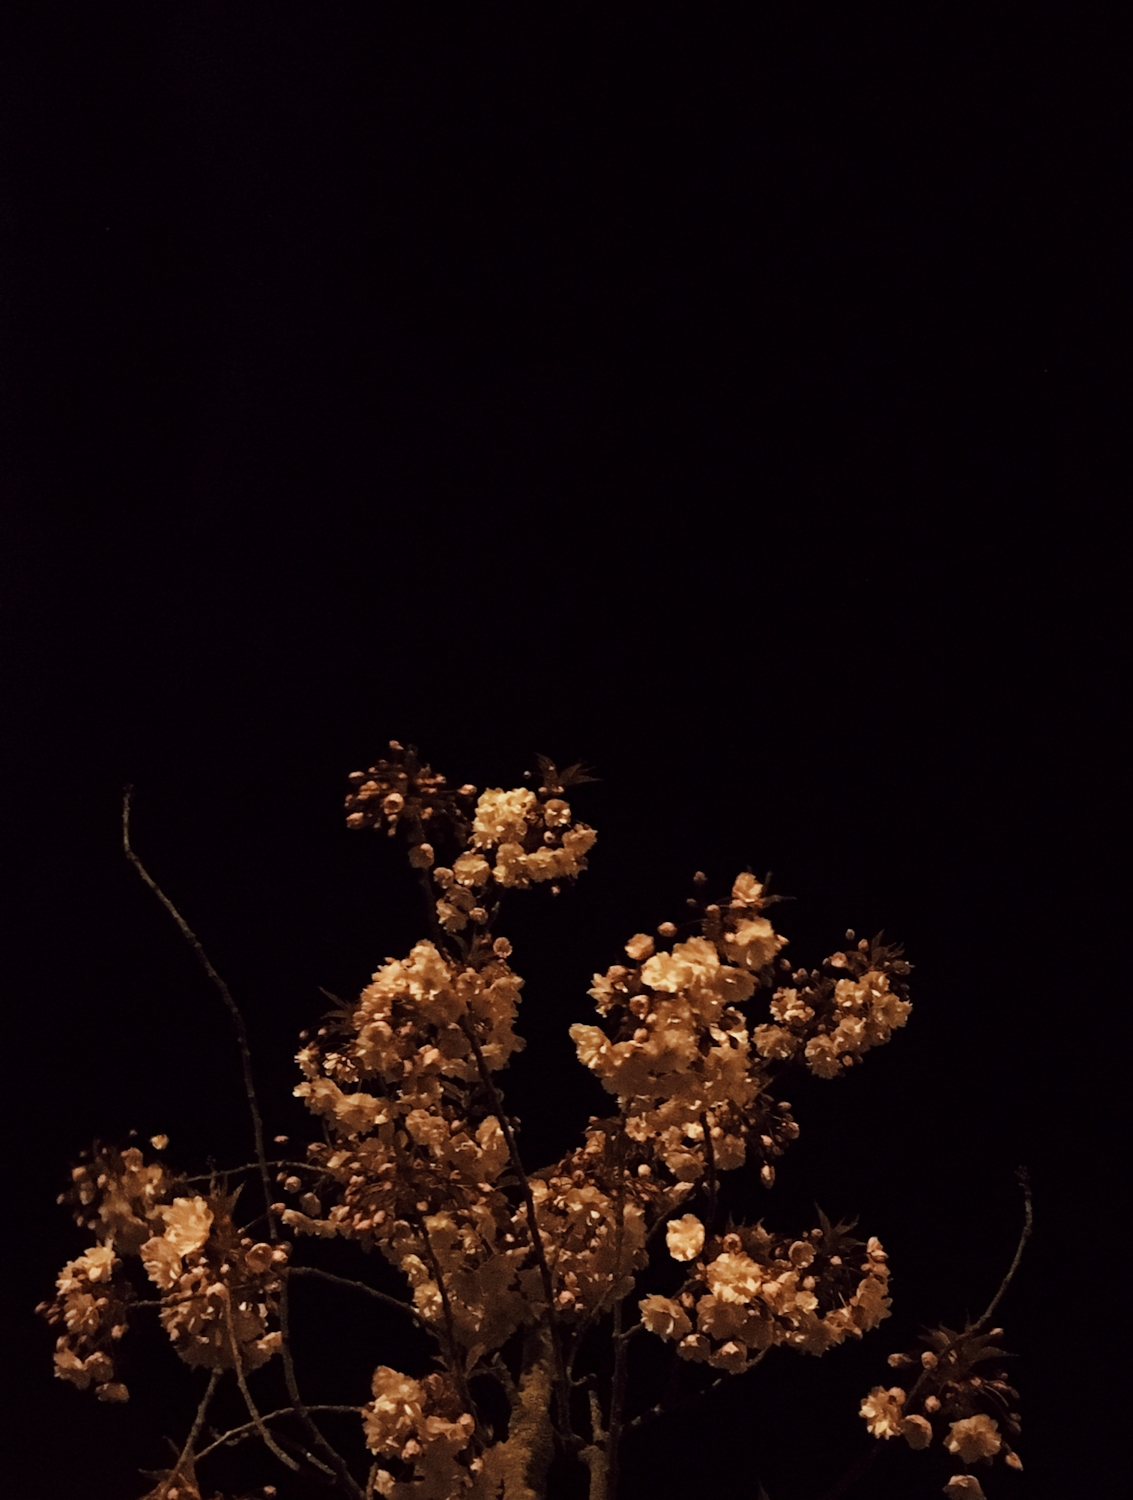 Delicate nighttime blossoms